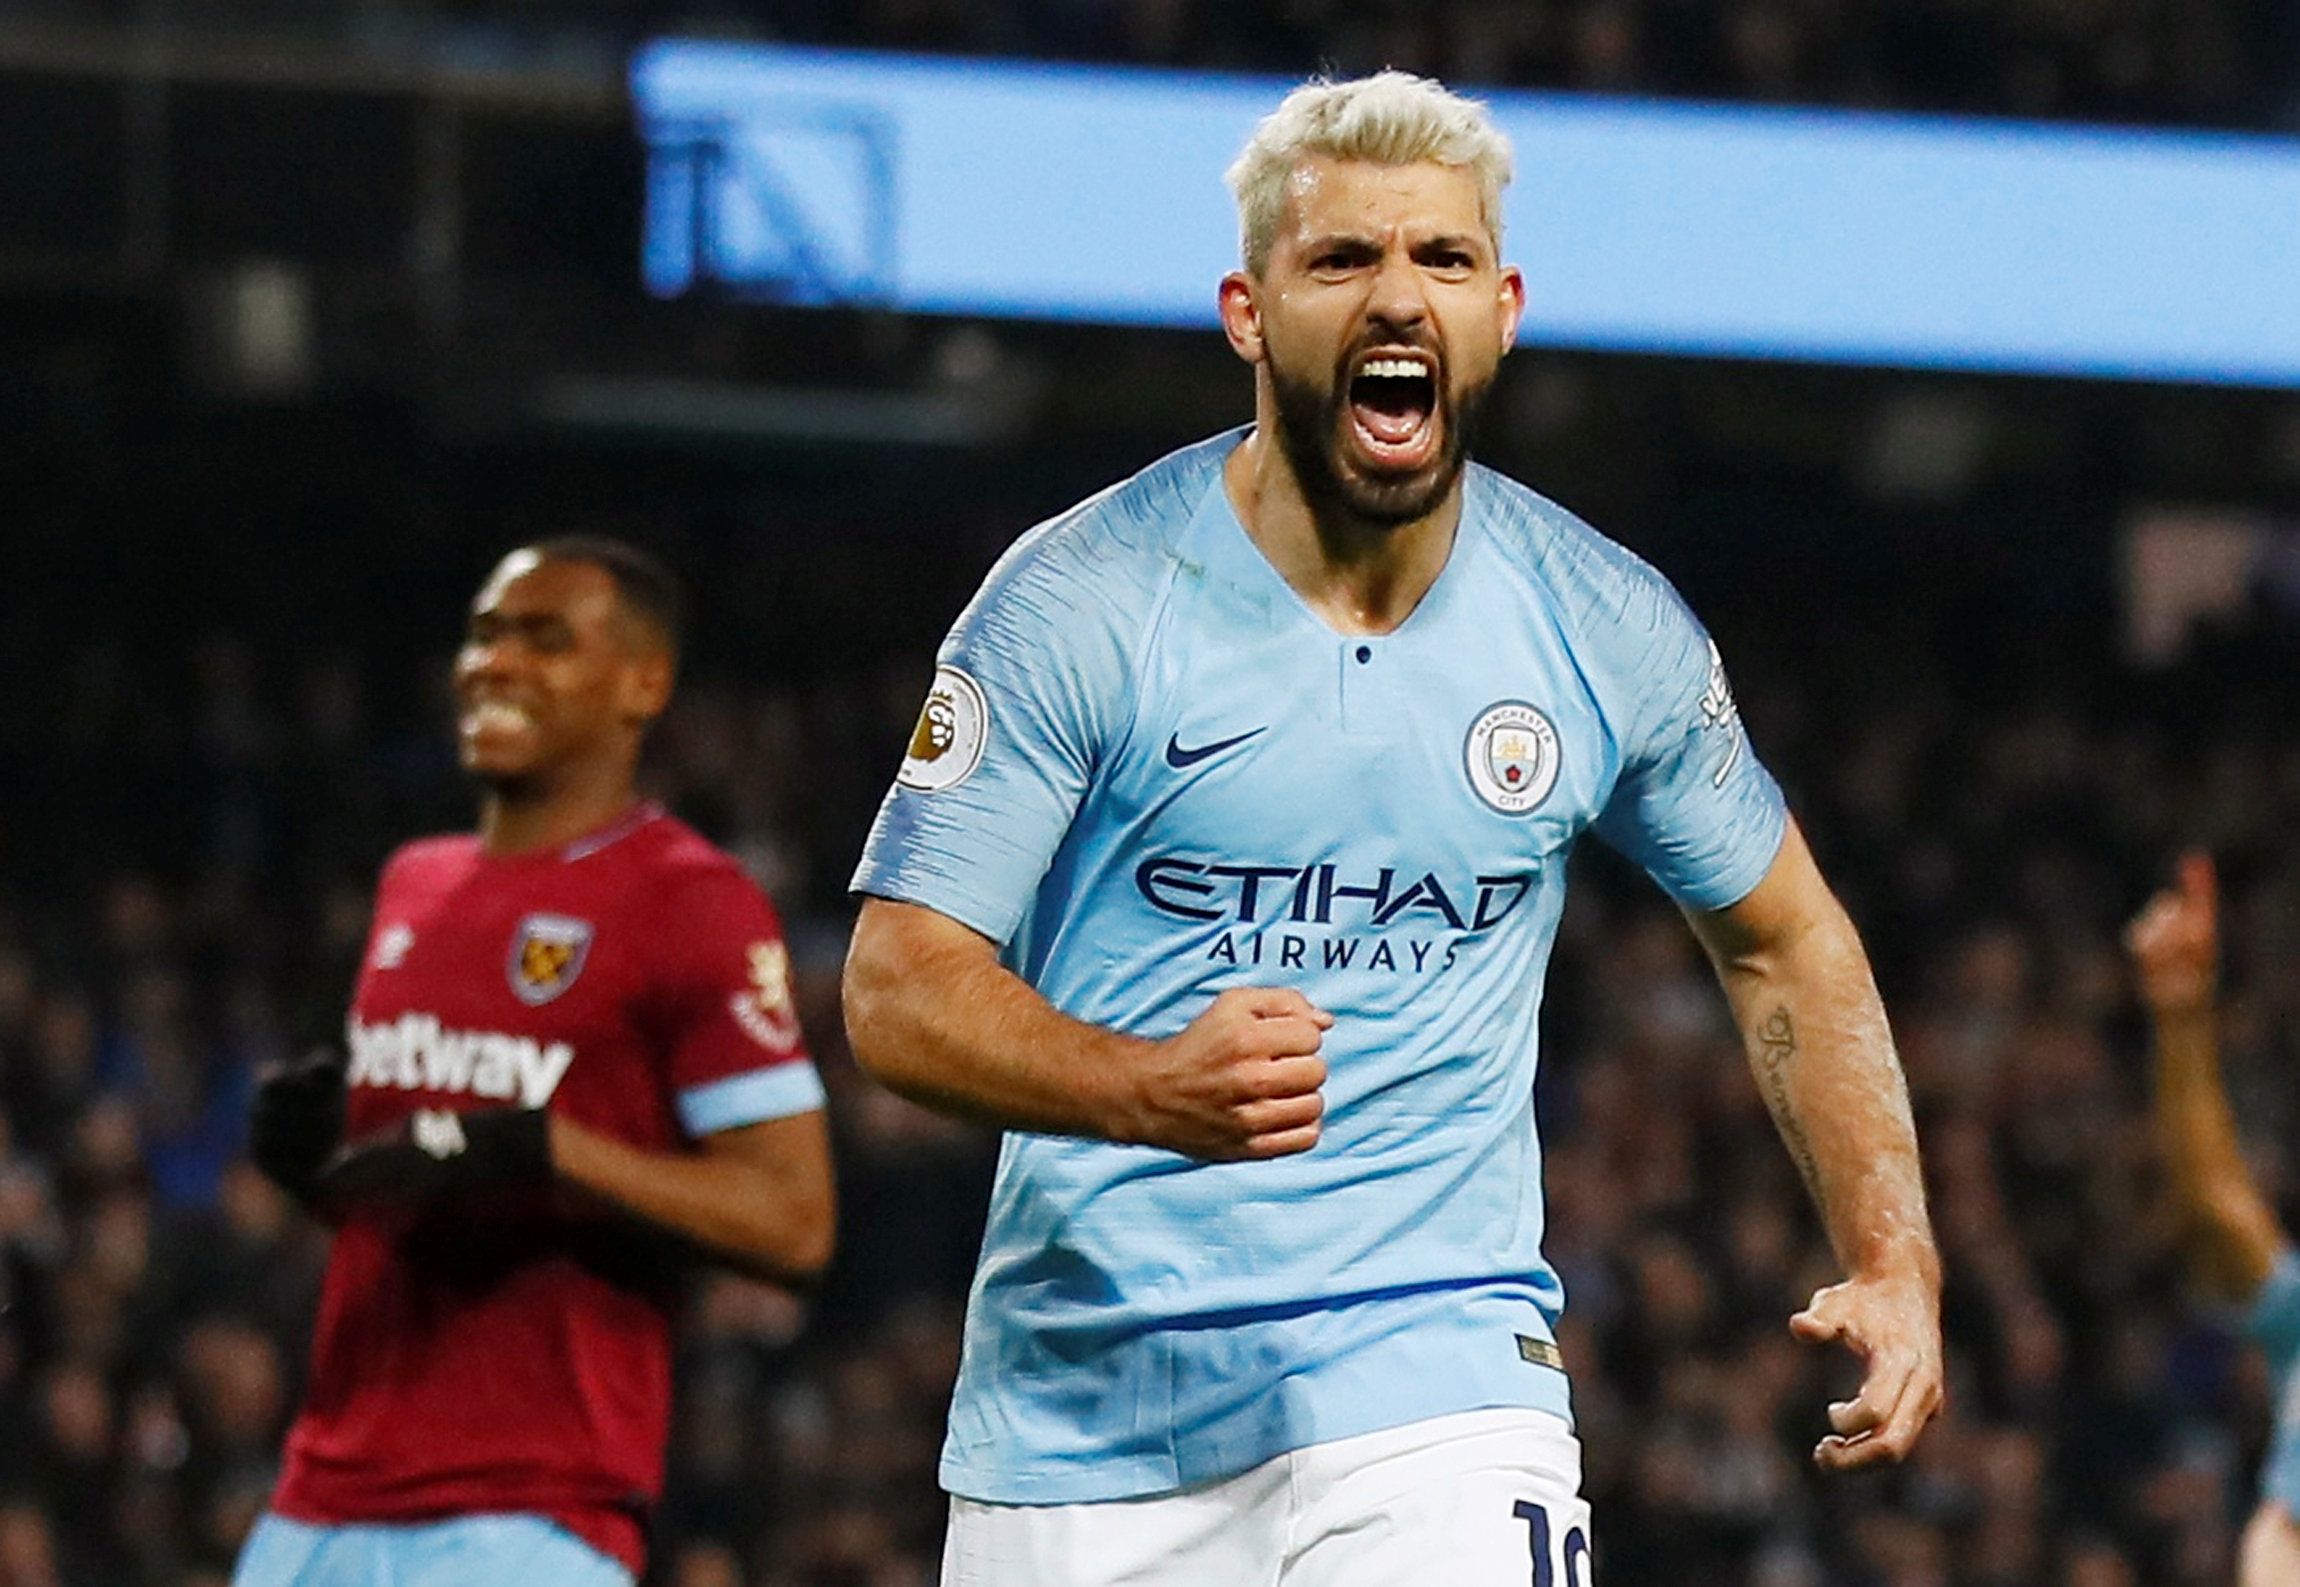 Soccer Football - Premier League - Manchester City v West Ham United - Etihad Stadium, Manchester, Britain - February 27, 2019  Manchester City's Sergio Aguero celebrates scoring their first goal from the penalty spot    Action Images via Reuters/Jason Cairnduff  EDITORIAL USE ONLY. No use with unauthorized audio, video, data, fixture lists, club/league logos or "live" services. Online in-match use limited to 75 images, no video emulation. No use in betting, games or single club/league/player pu